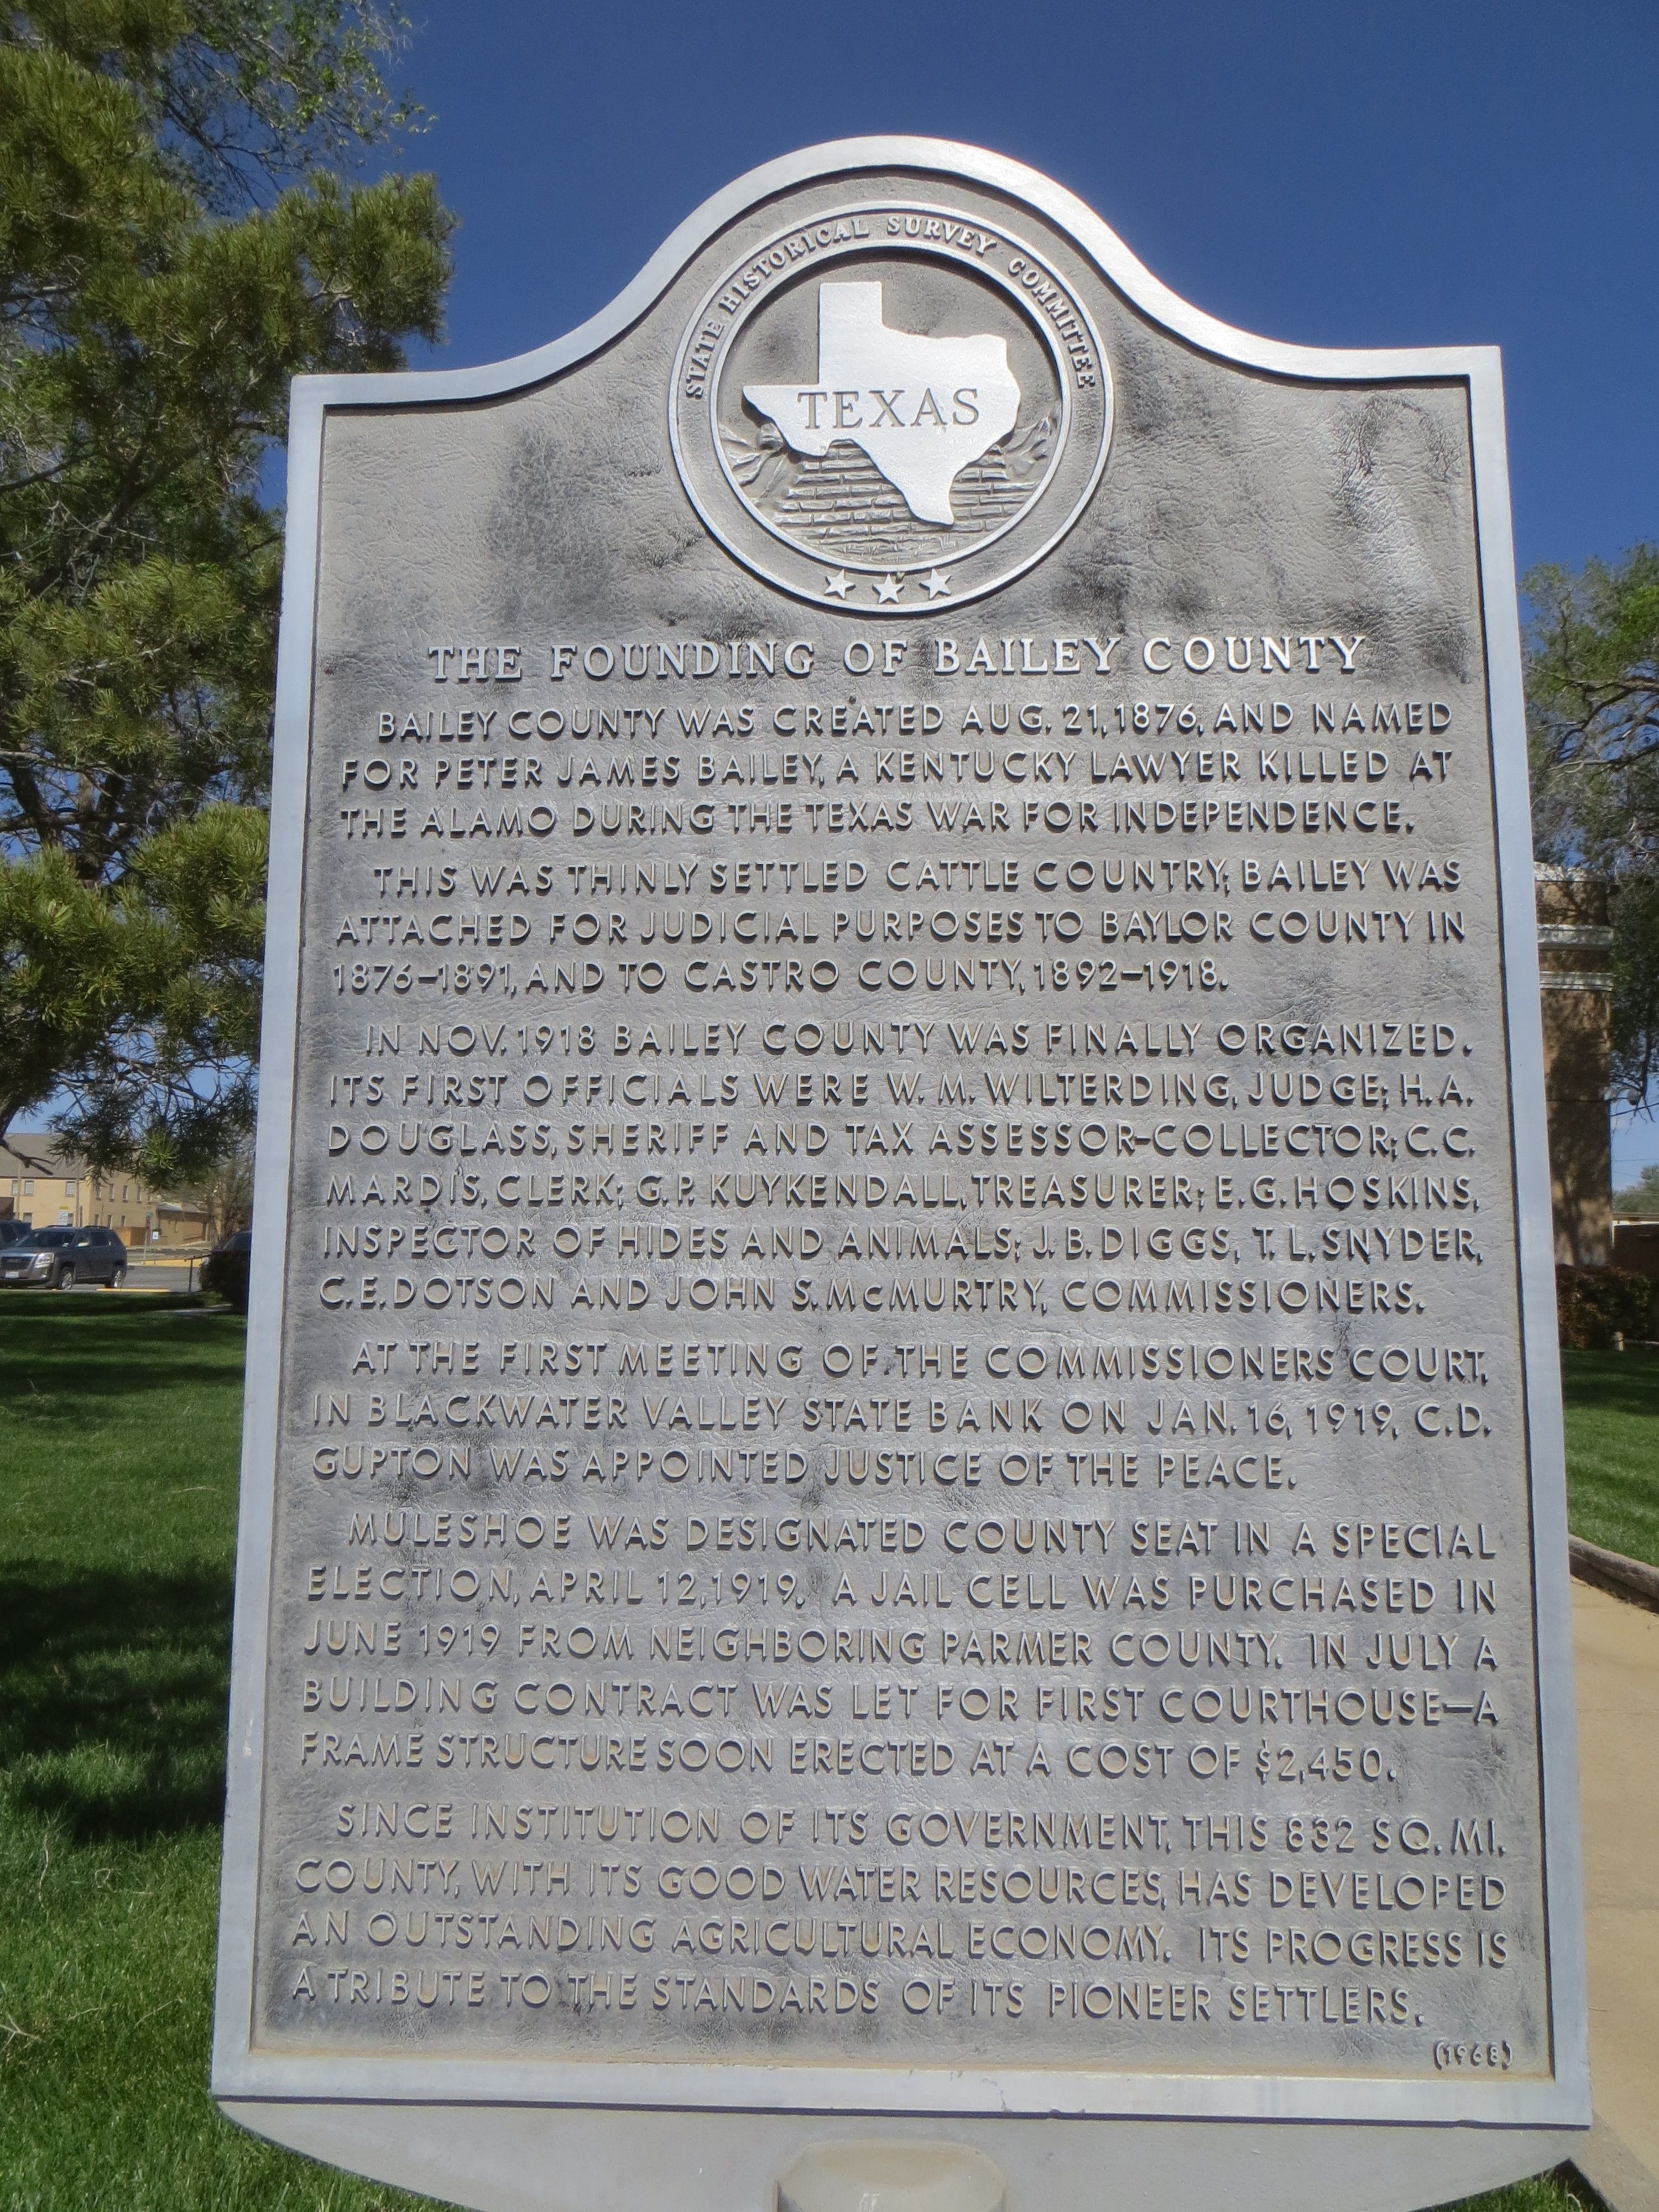 The Founding of Bailey County Marker